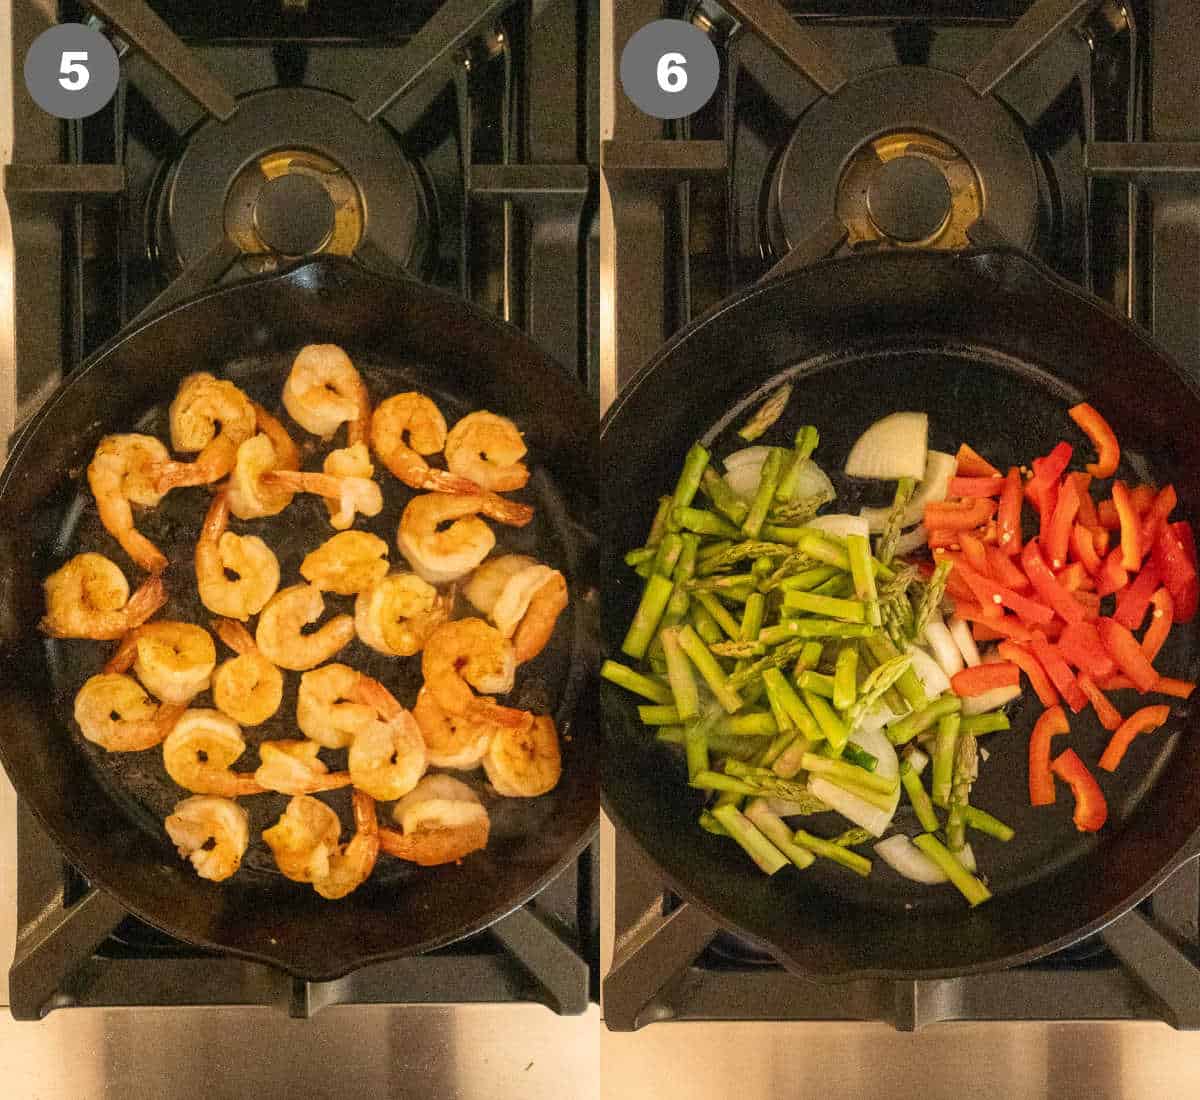 Shrimp being cooked in a cast iron skillet, removed then veggies added in.